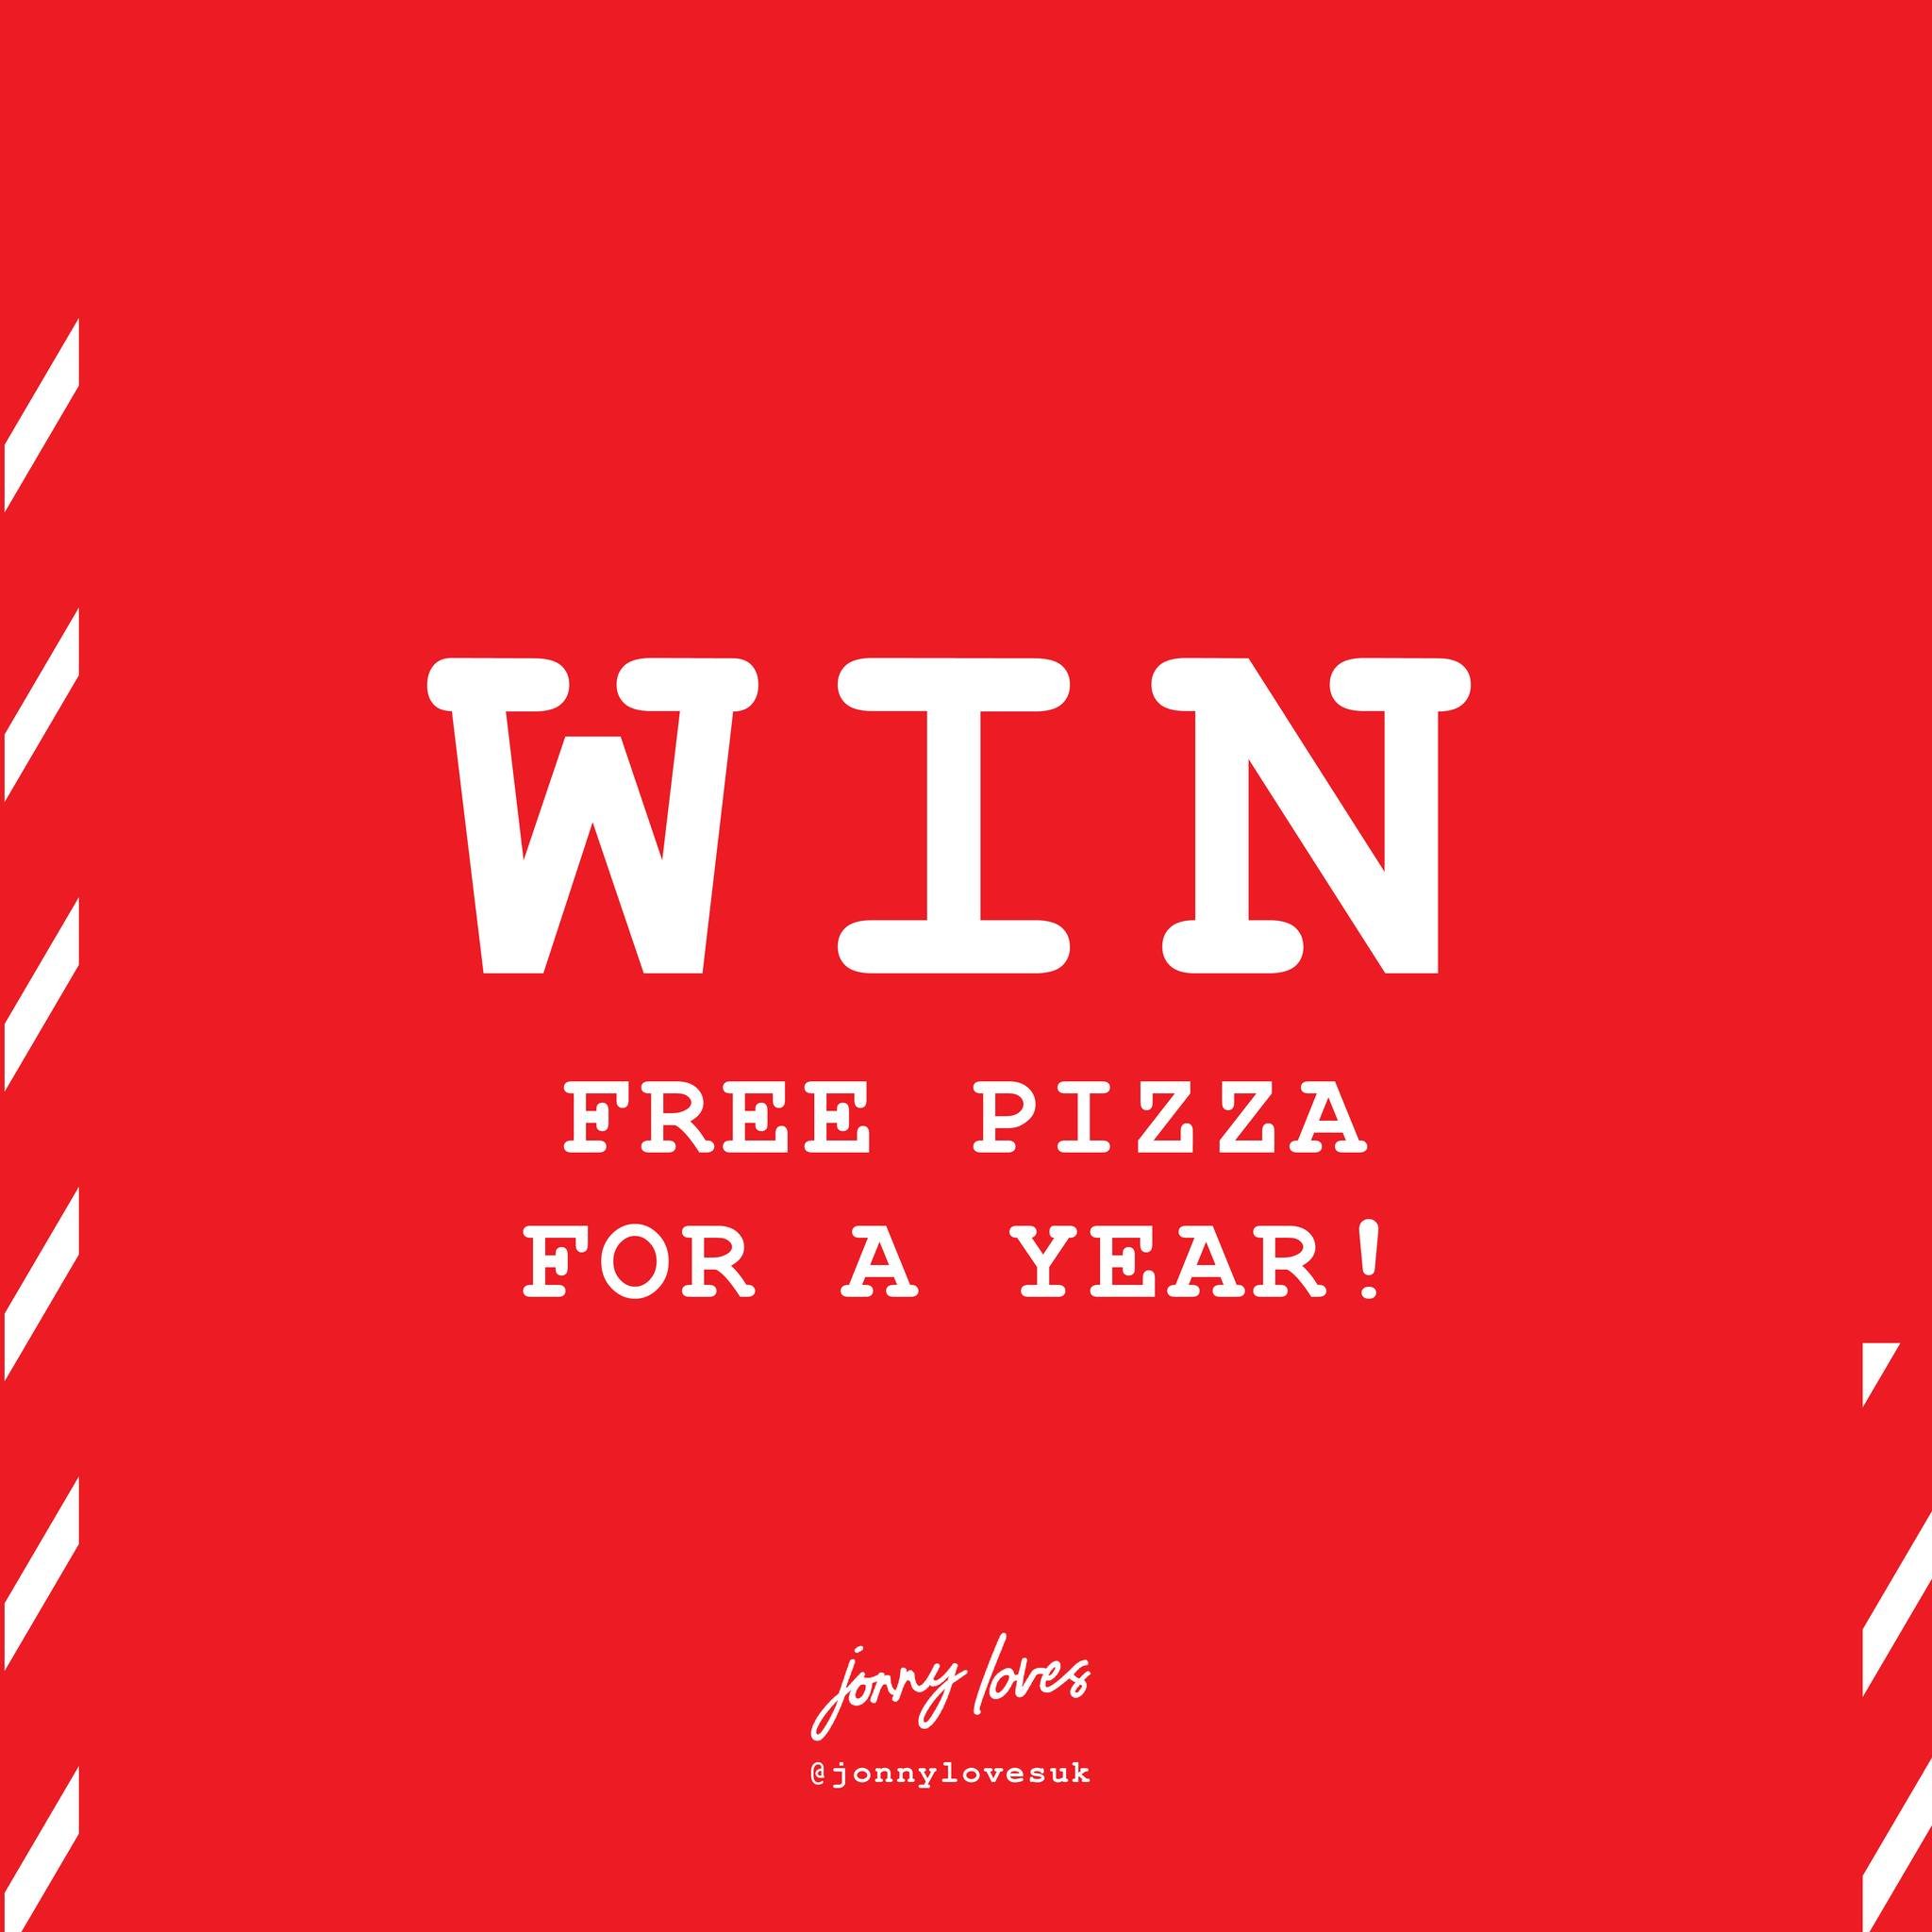 It's competition time!

Fancy winning pizza every month for the next year? Who wouldn't? To be in with a chance of winning simply:

✅ Like our page
✅ Tag 2 mates you'd share your prize with (You don't have to bring them if you win, we won't judge for